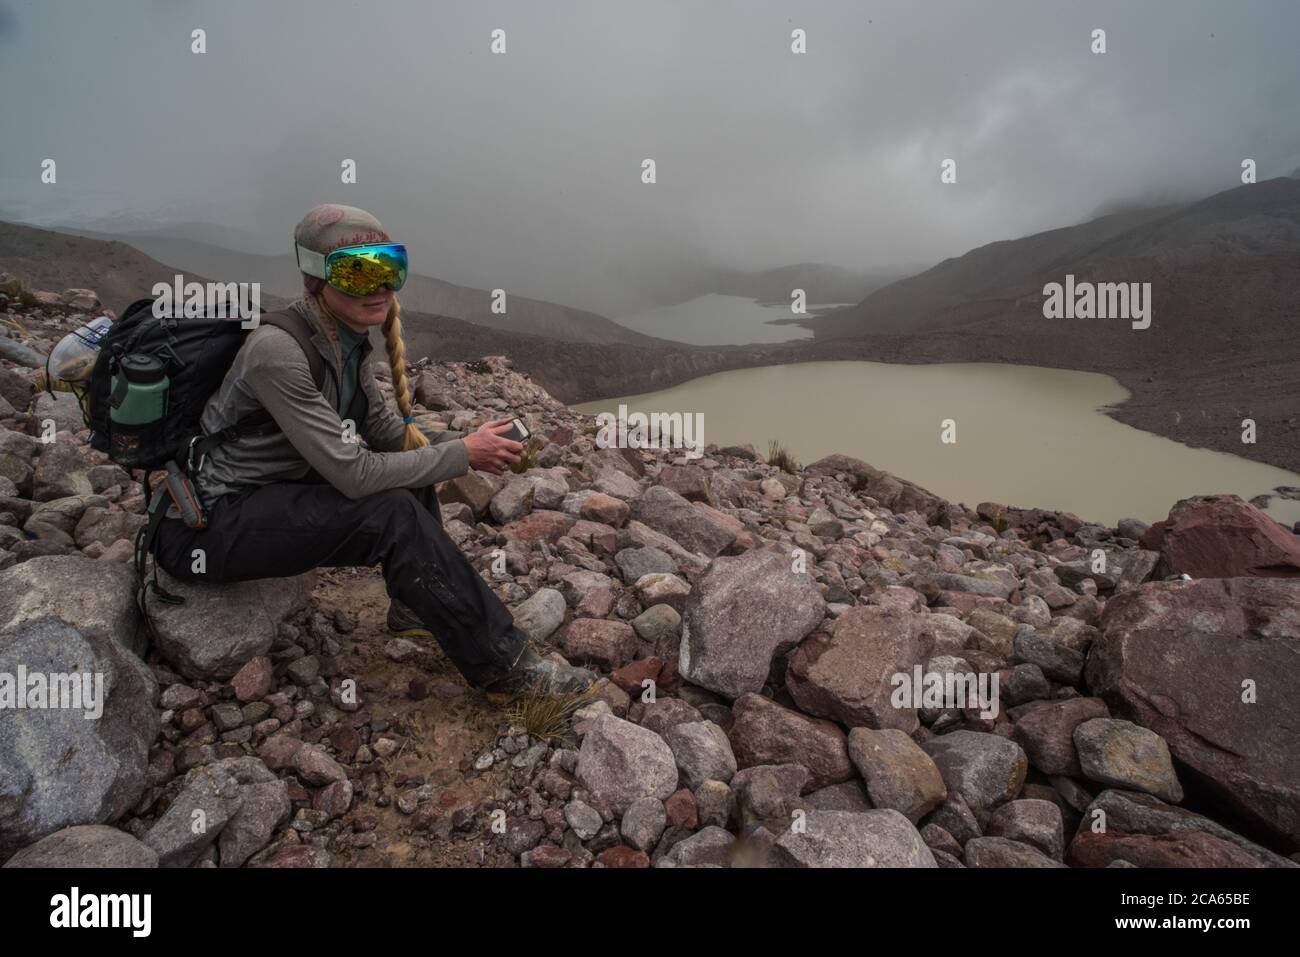 A biologist hiking through the Cordillera Vilcanota takes a break and sits on a stone high in the Andes mountains where there is little oxygen. Stock Photo